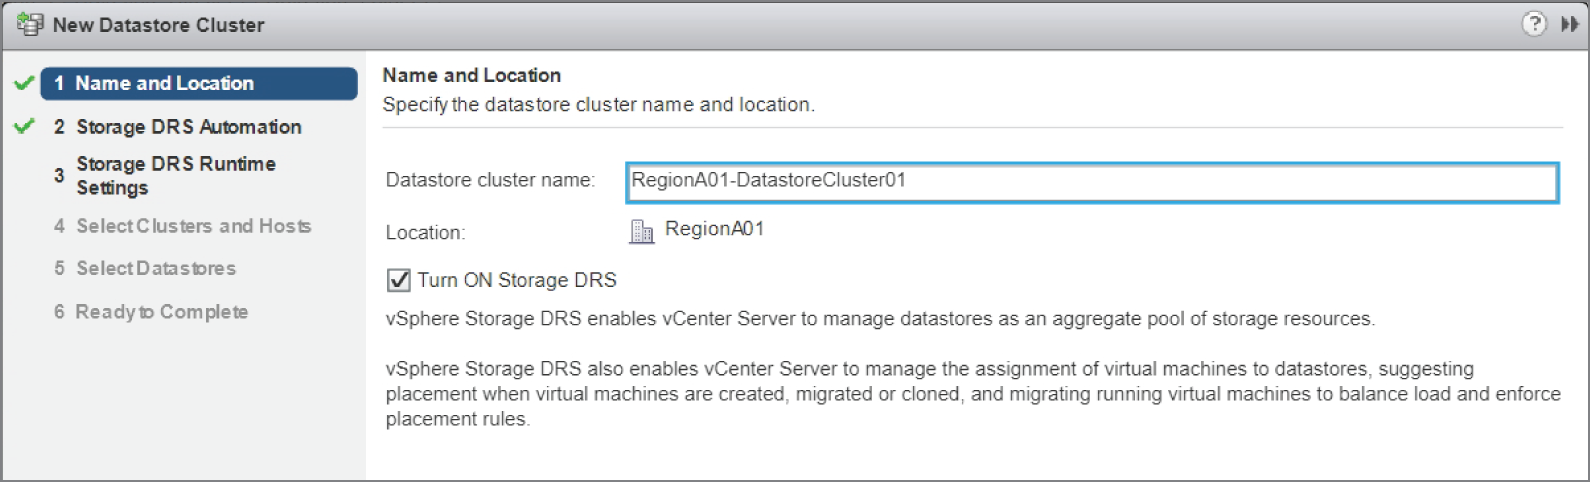 Snapshot of setting a name for the new datastore cluster and leave Storage DRS On.